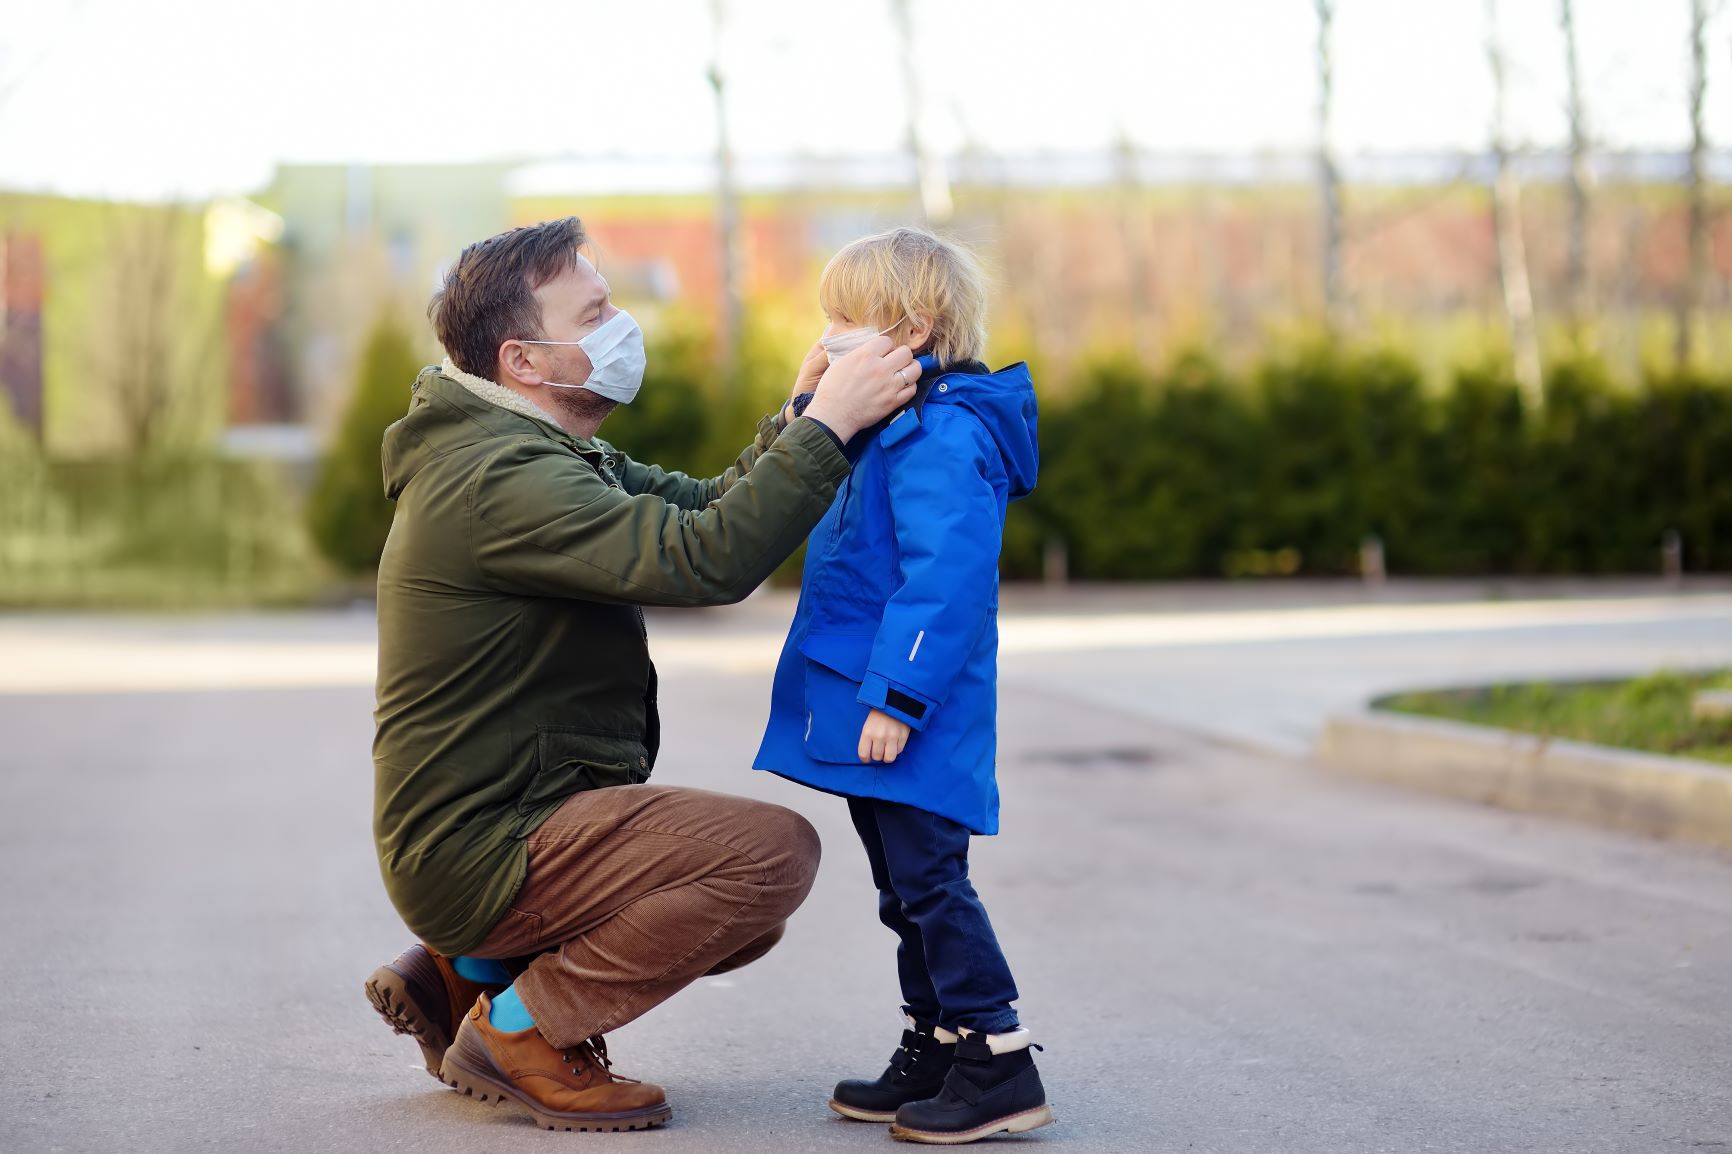 man wearing a jacket and a medical mask adjusting his son's medical mask outside